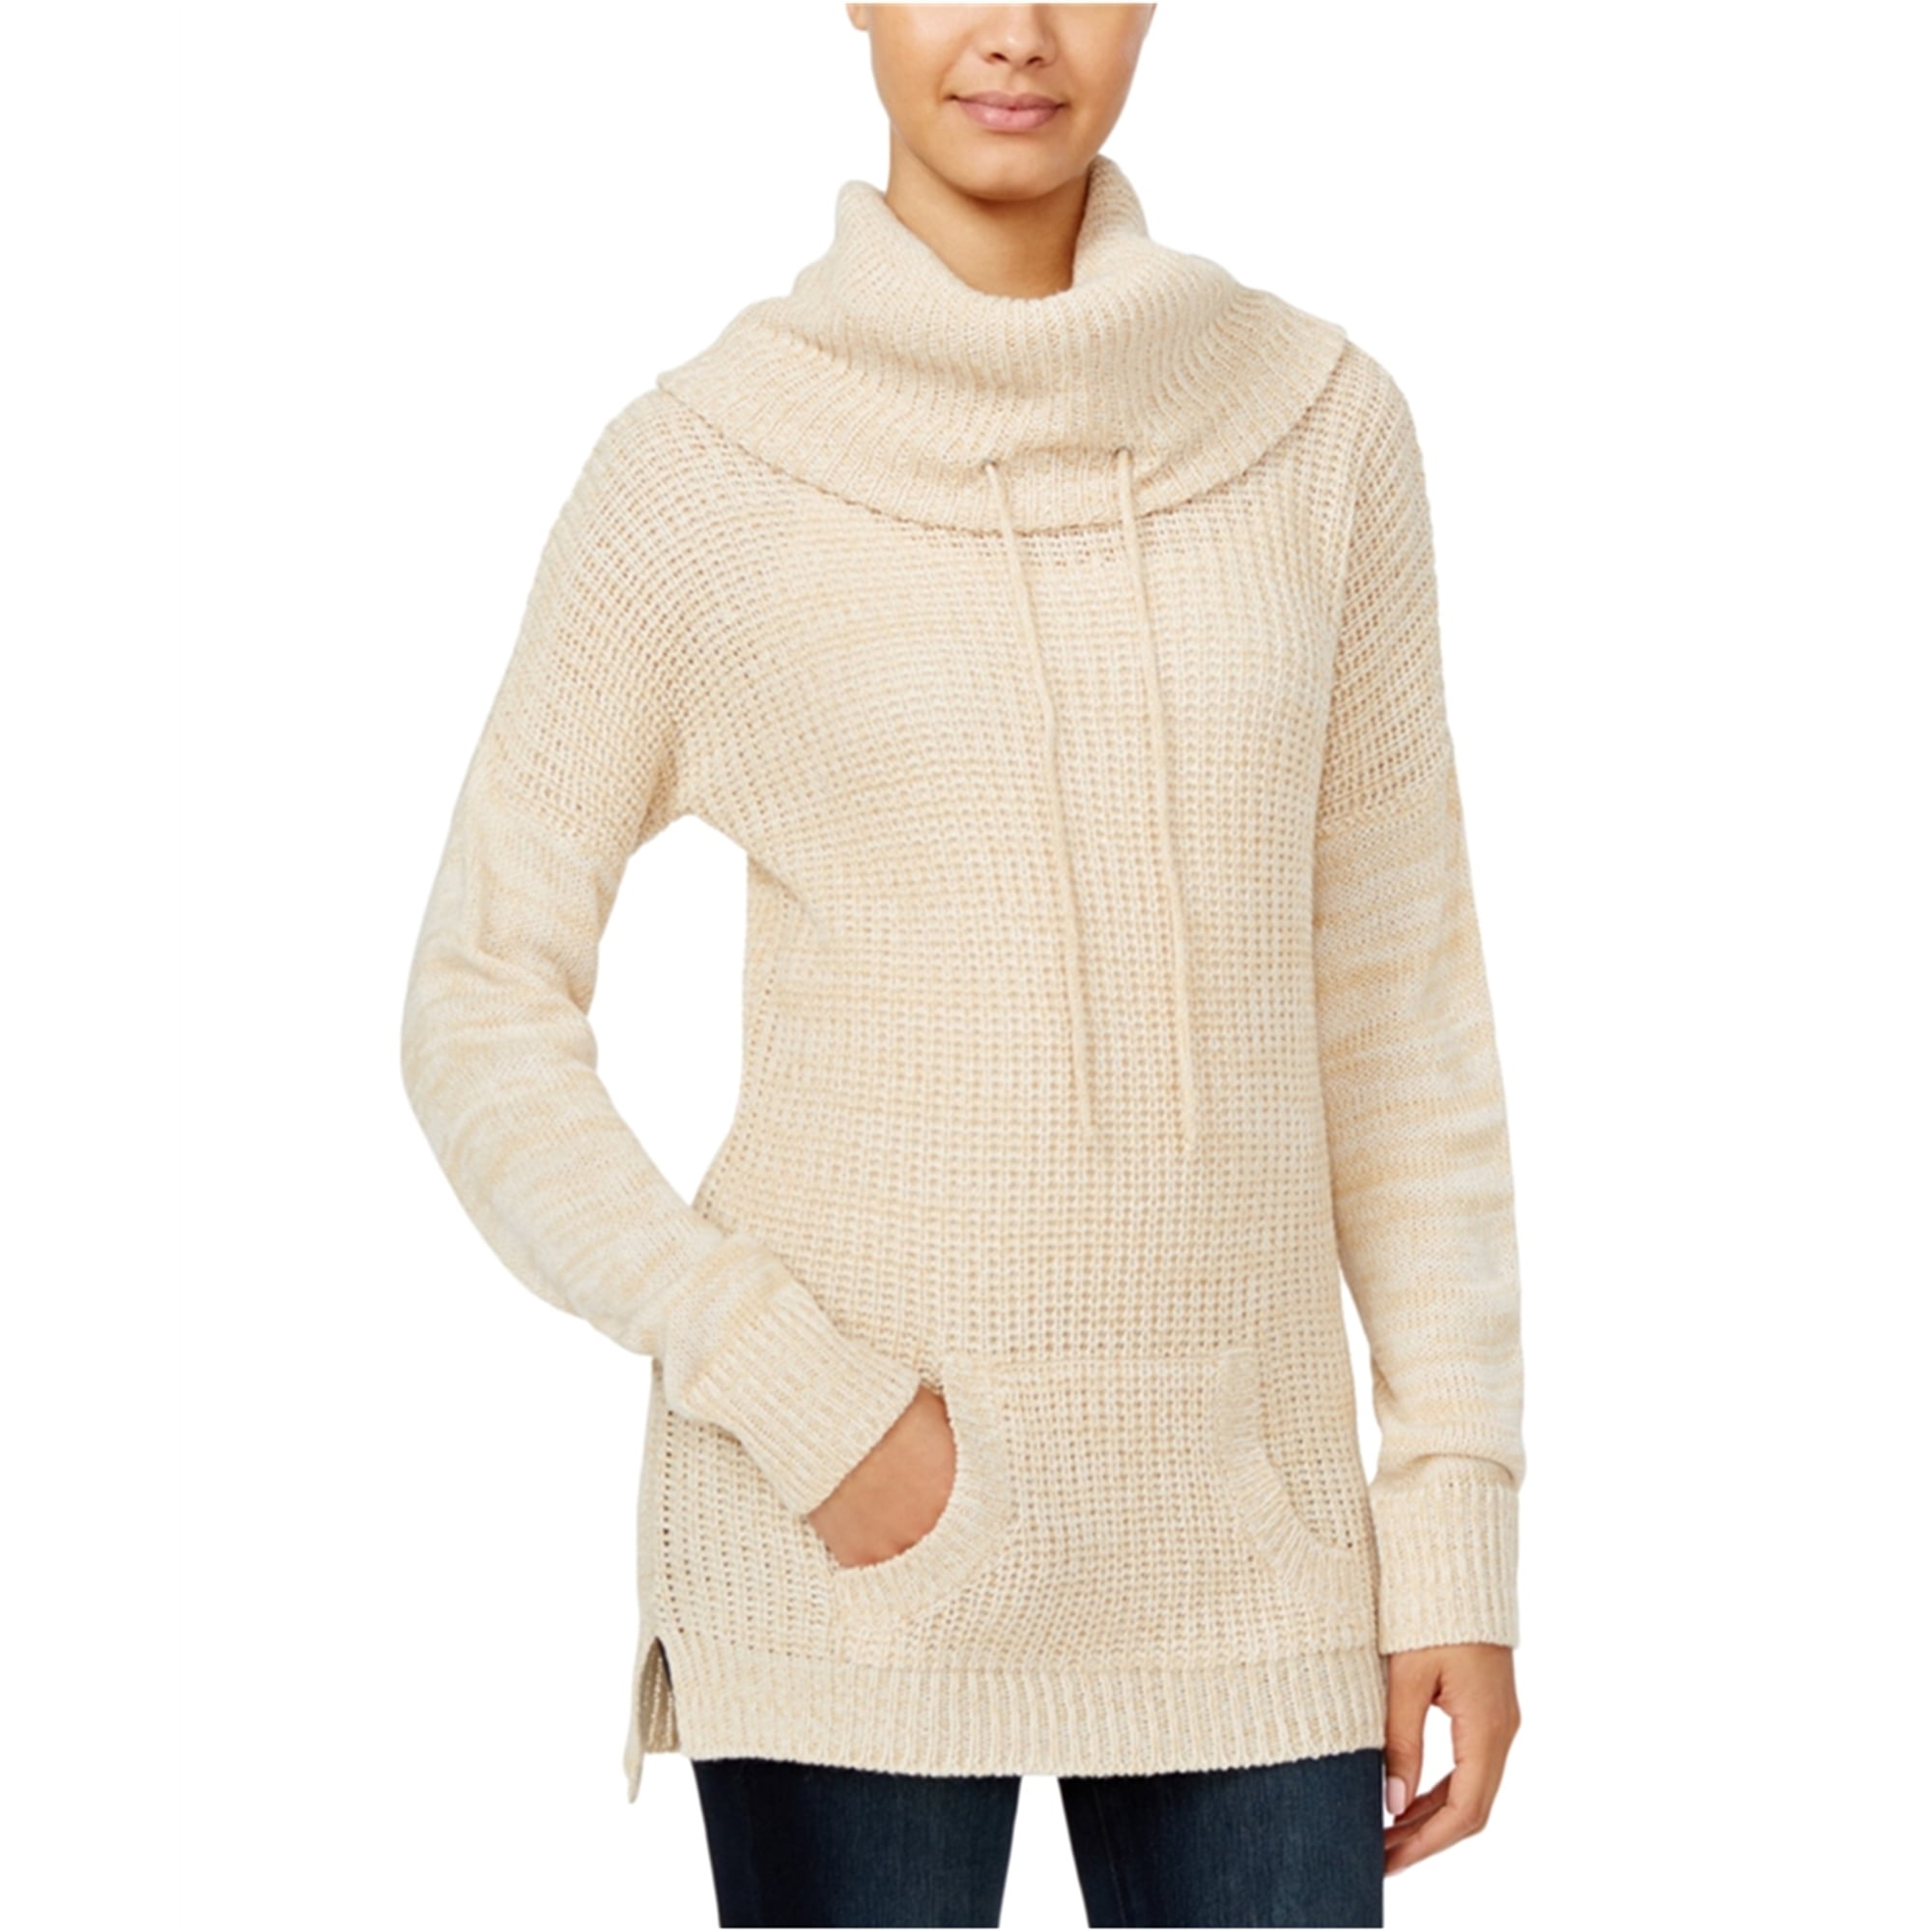 Planet Gold Womens Ribbed Knit Sweater, Off-White, X-Small - Walmart.com